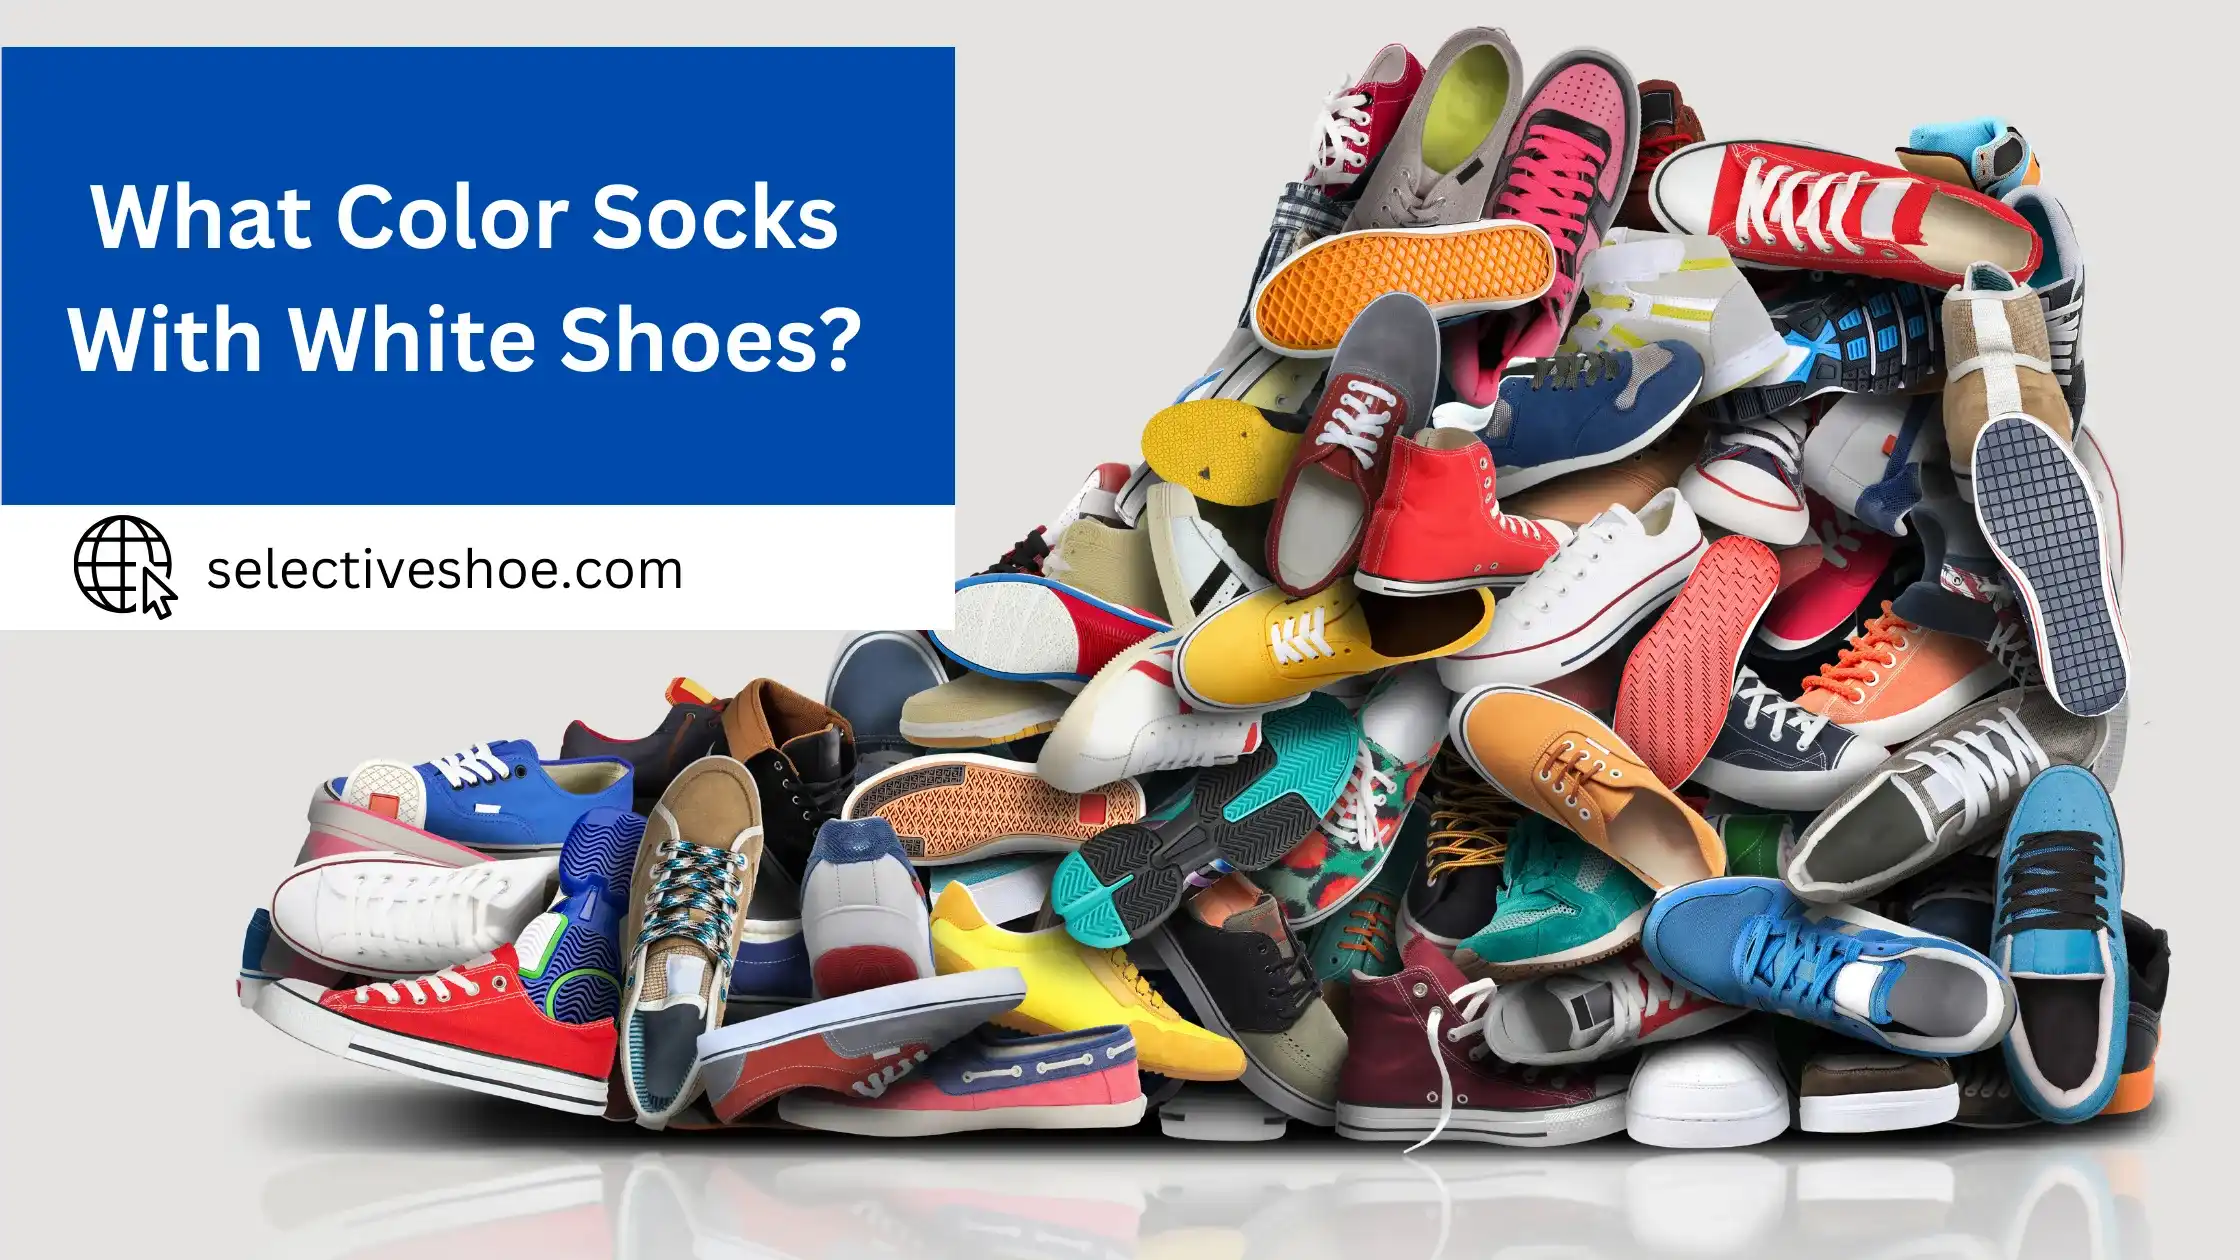 What Color Socks With White Shoes? Detailed Information